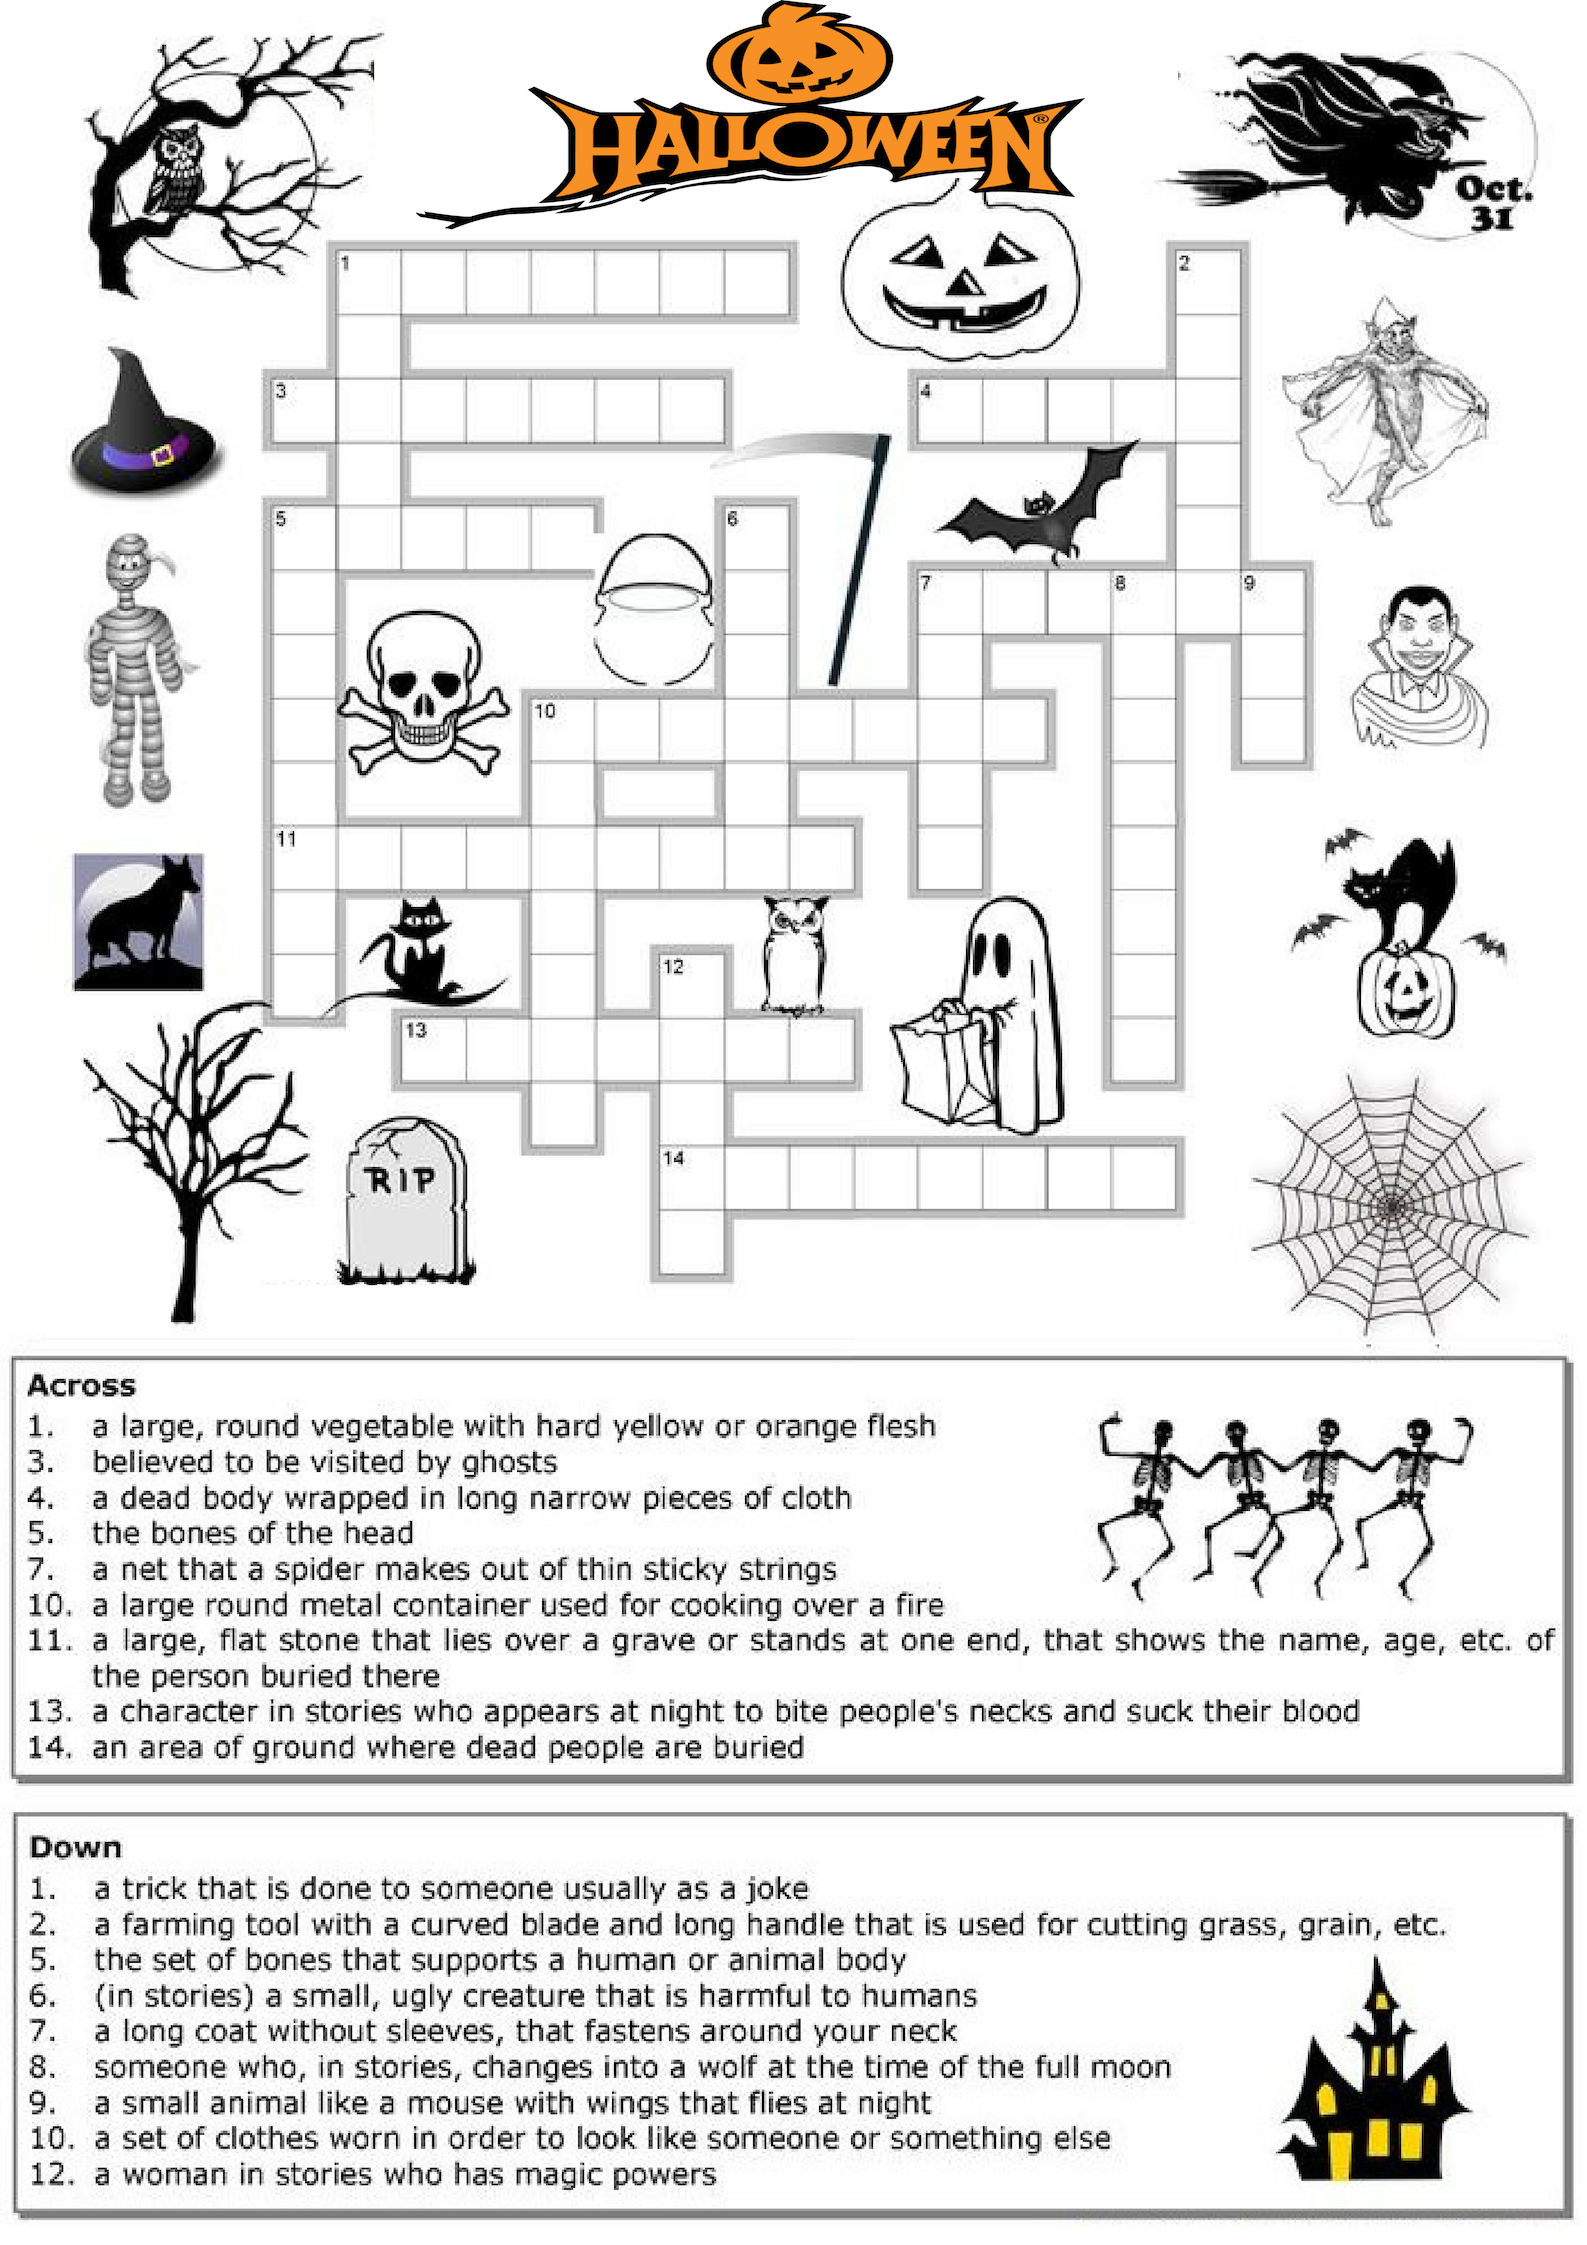 Play and Solve this interesting Halloween Crossword Puzzle Wealth Words